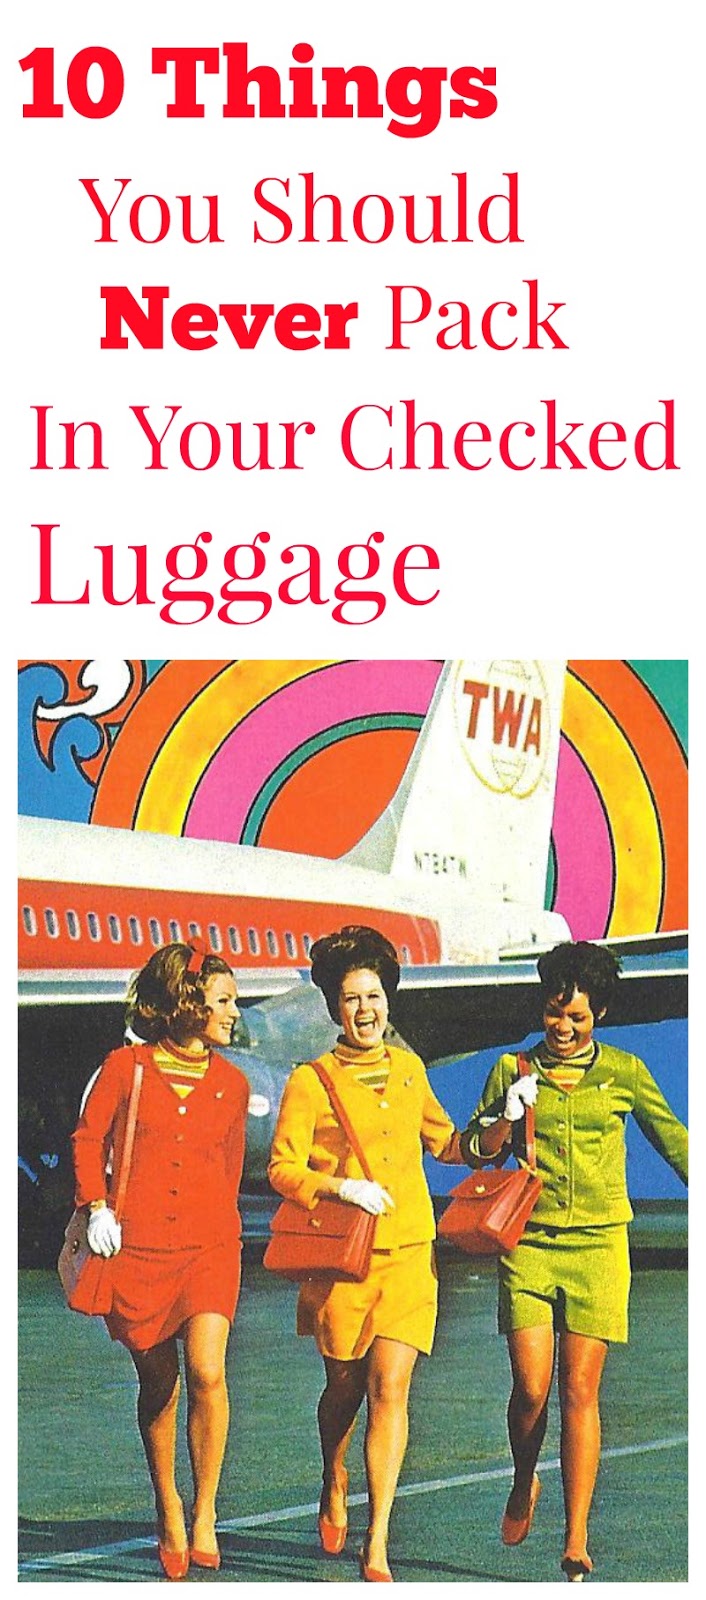 10 Things You Should Never Pack In Your Checked Luggage - Corinna B's World